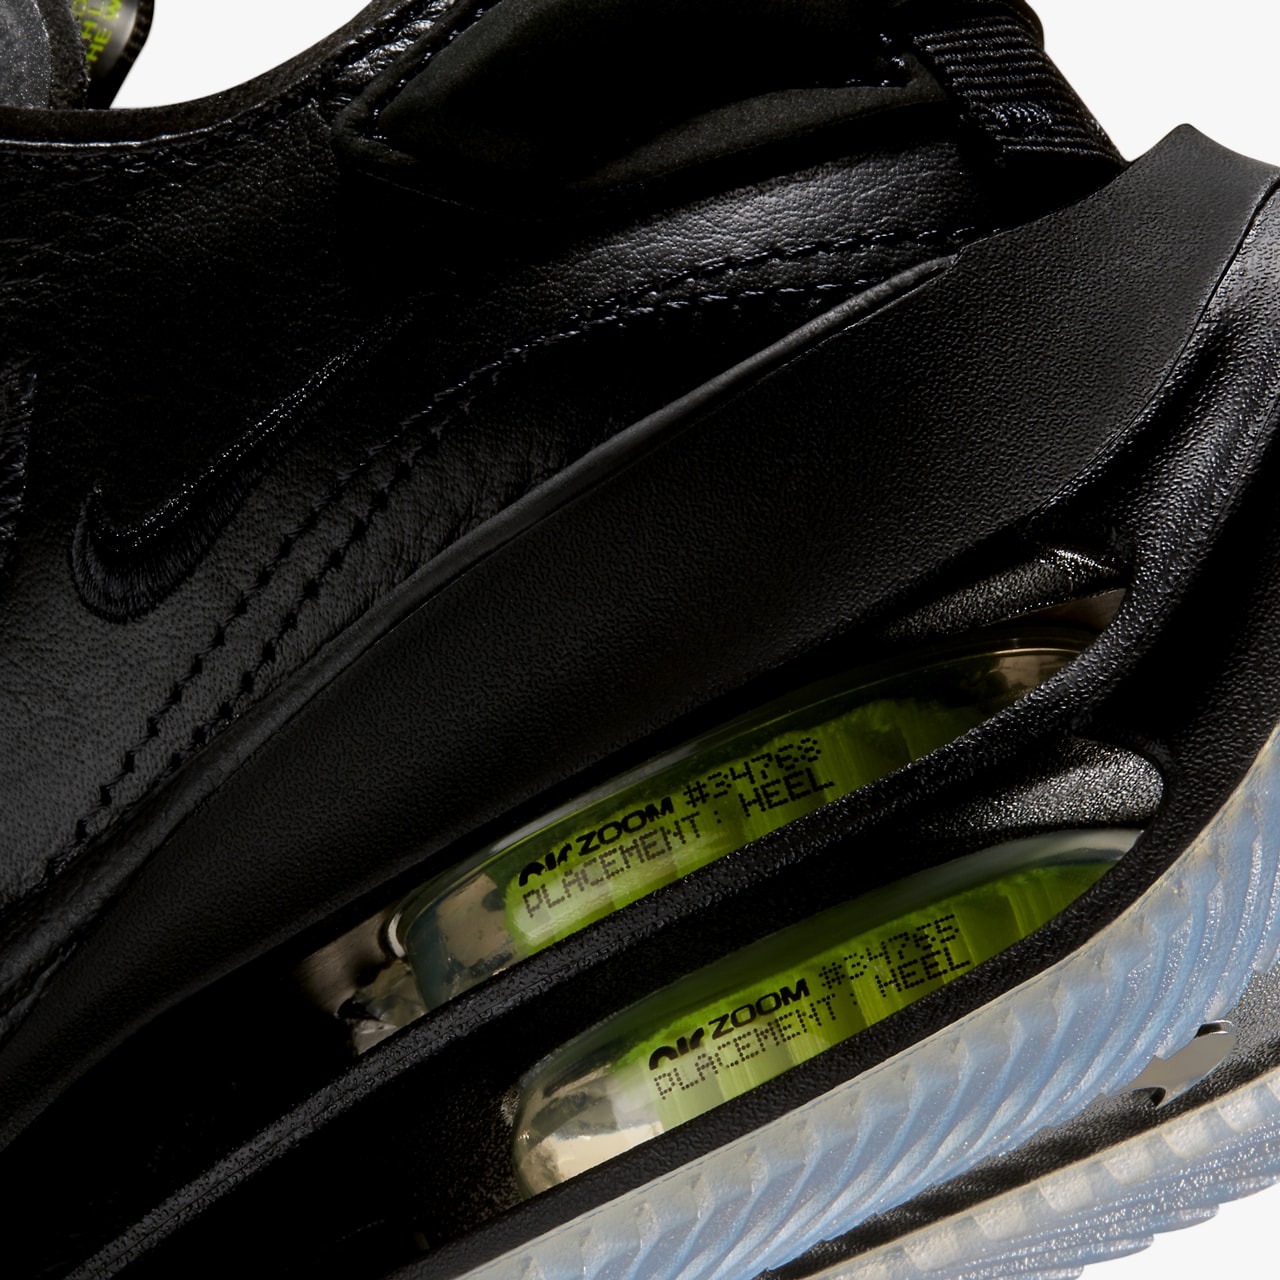 Nike Zoom Double Stacked 推出全新黑魂「Black/Volt」配色